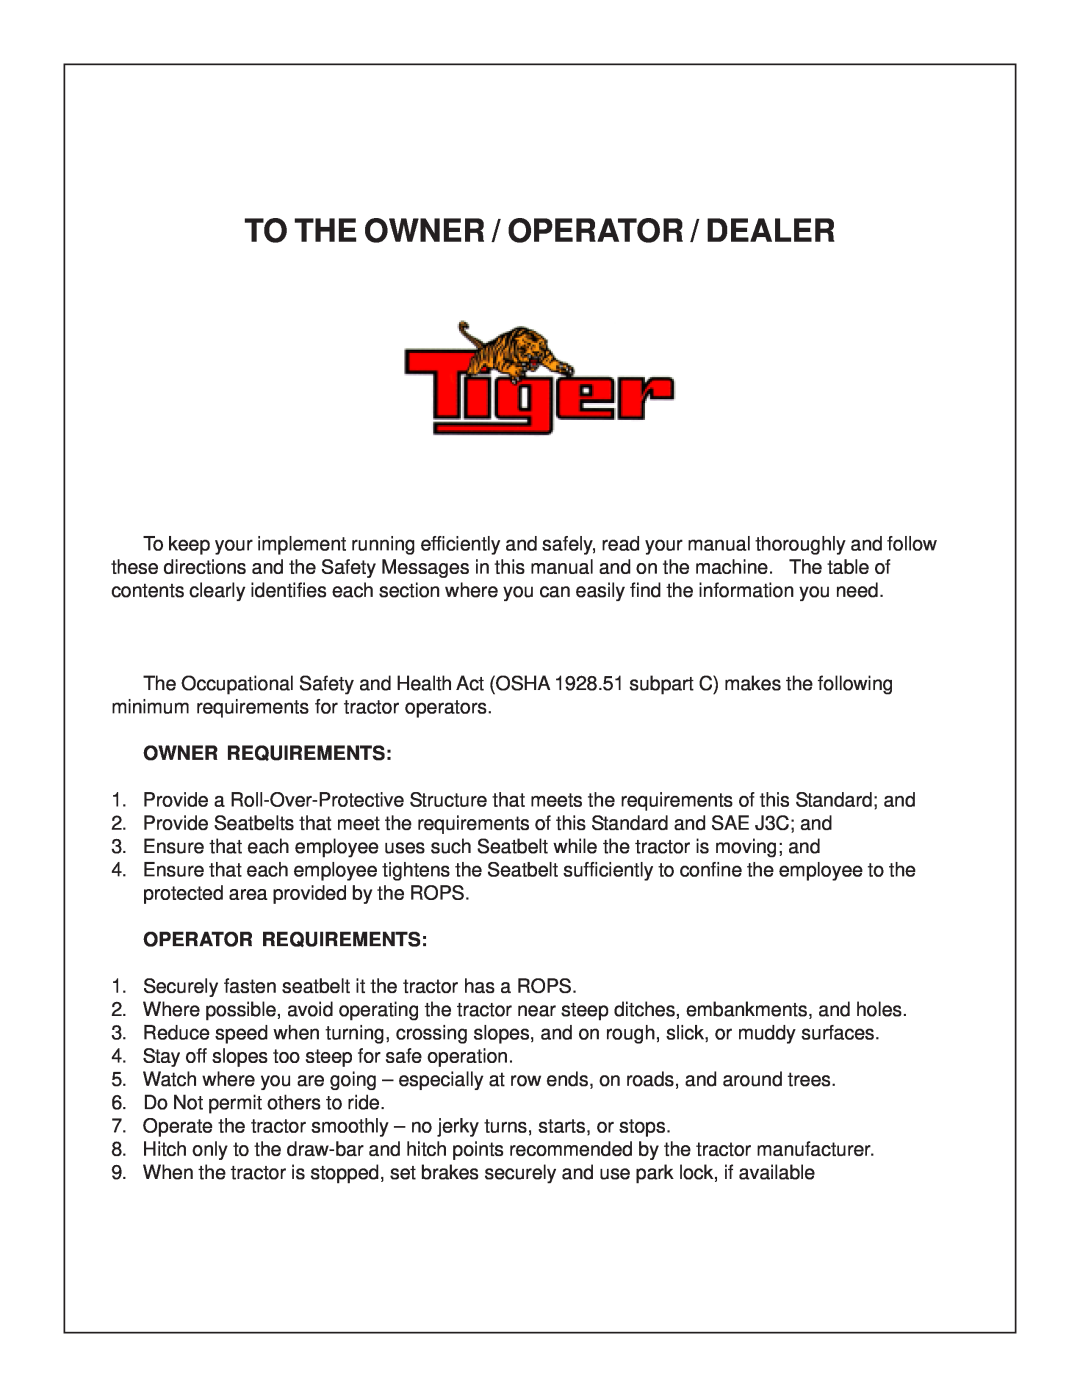 Tiger Products Co., Ltd JD 72-7520 manual To The Owner / Operator / Dealer, Owner Requirements, Operator Requirements 